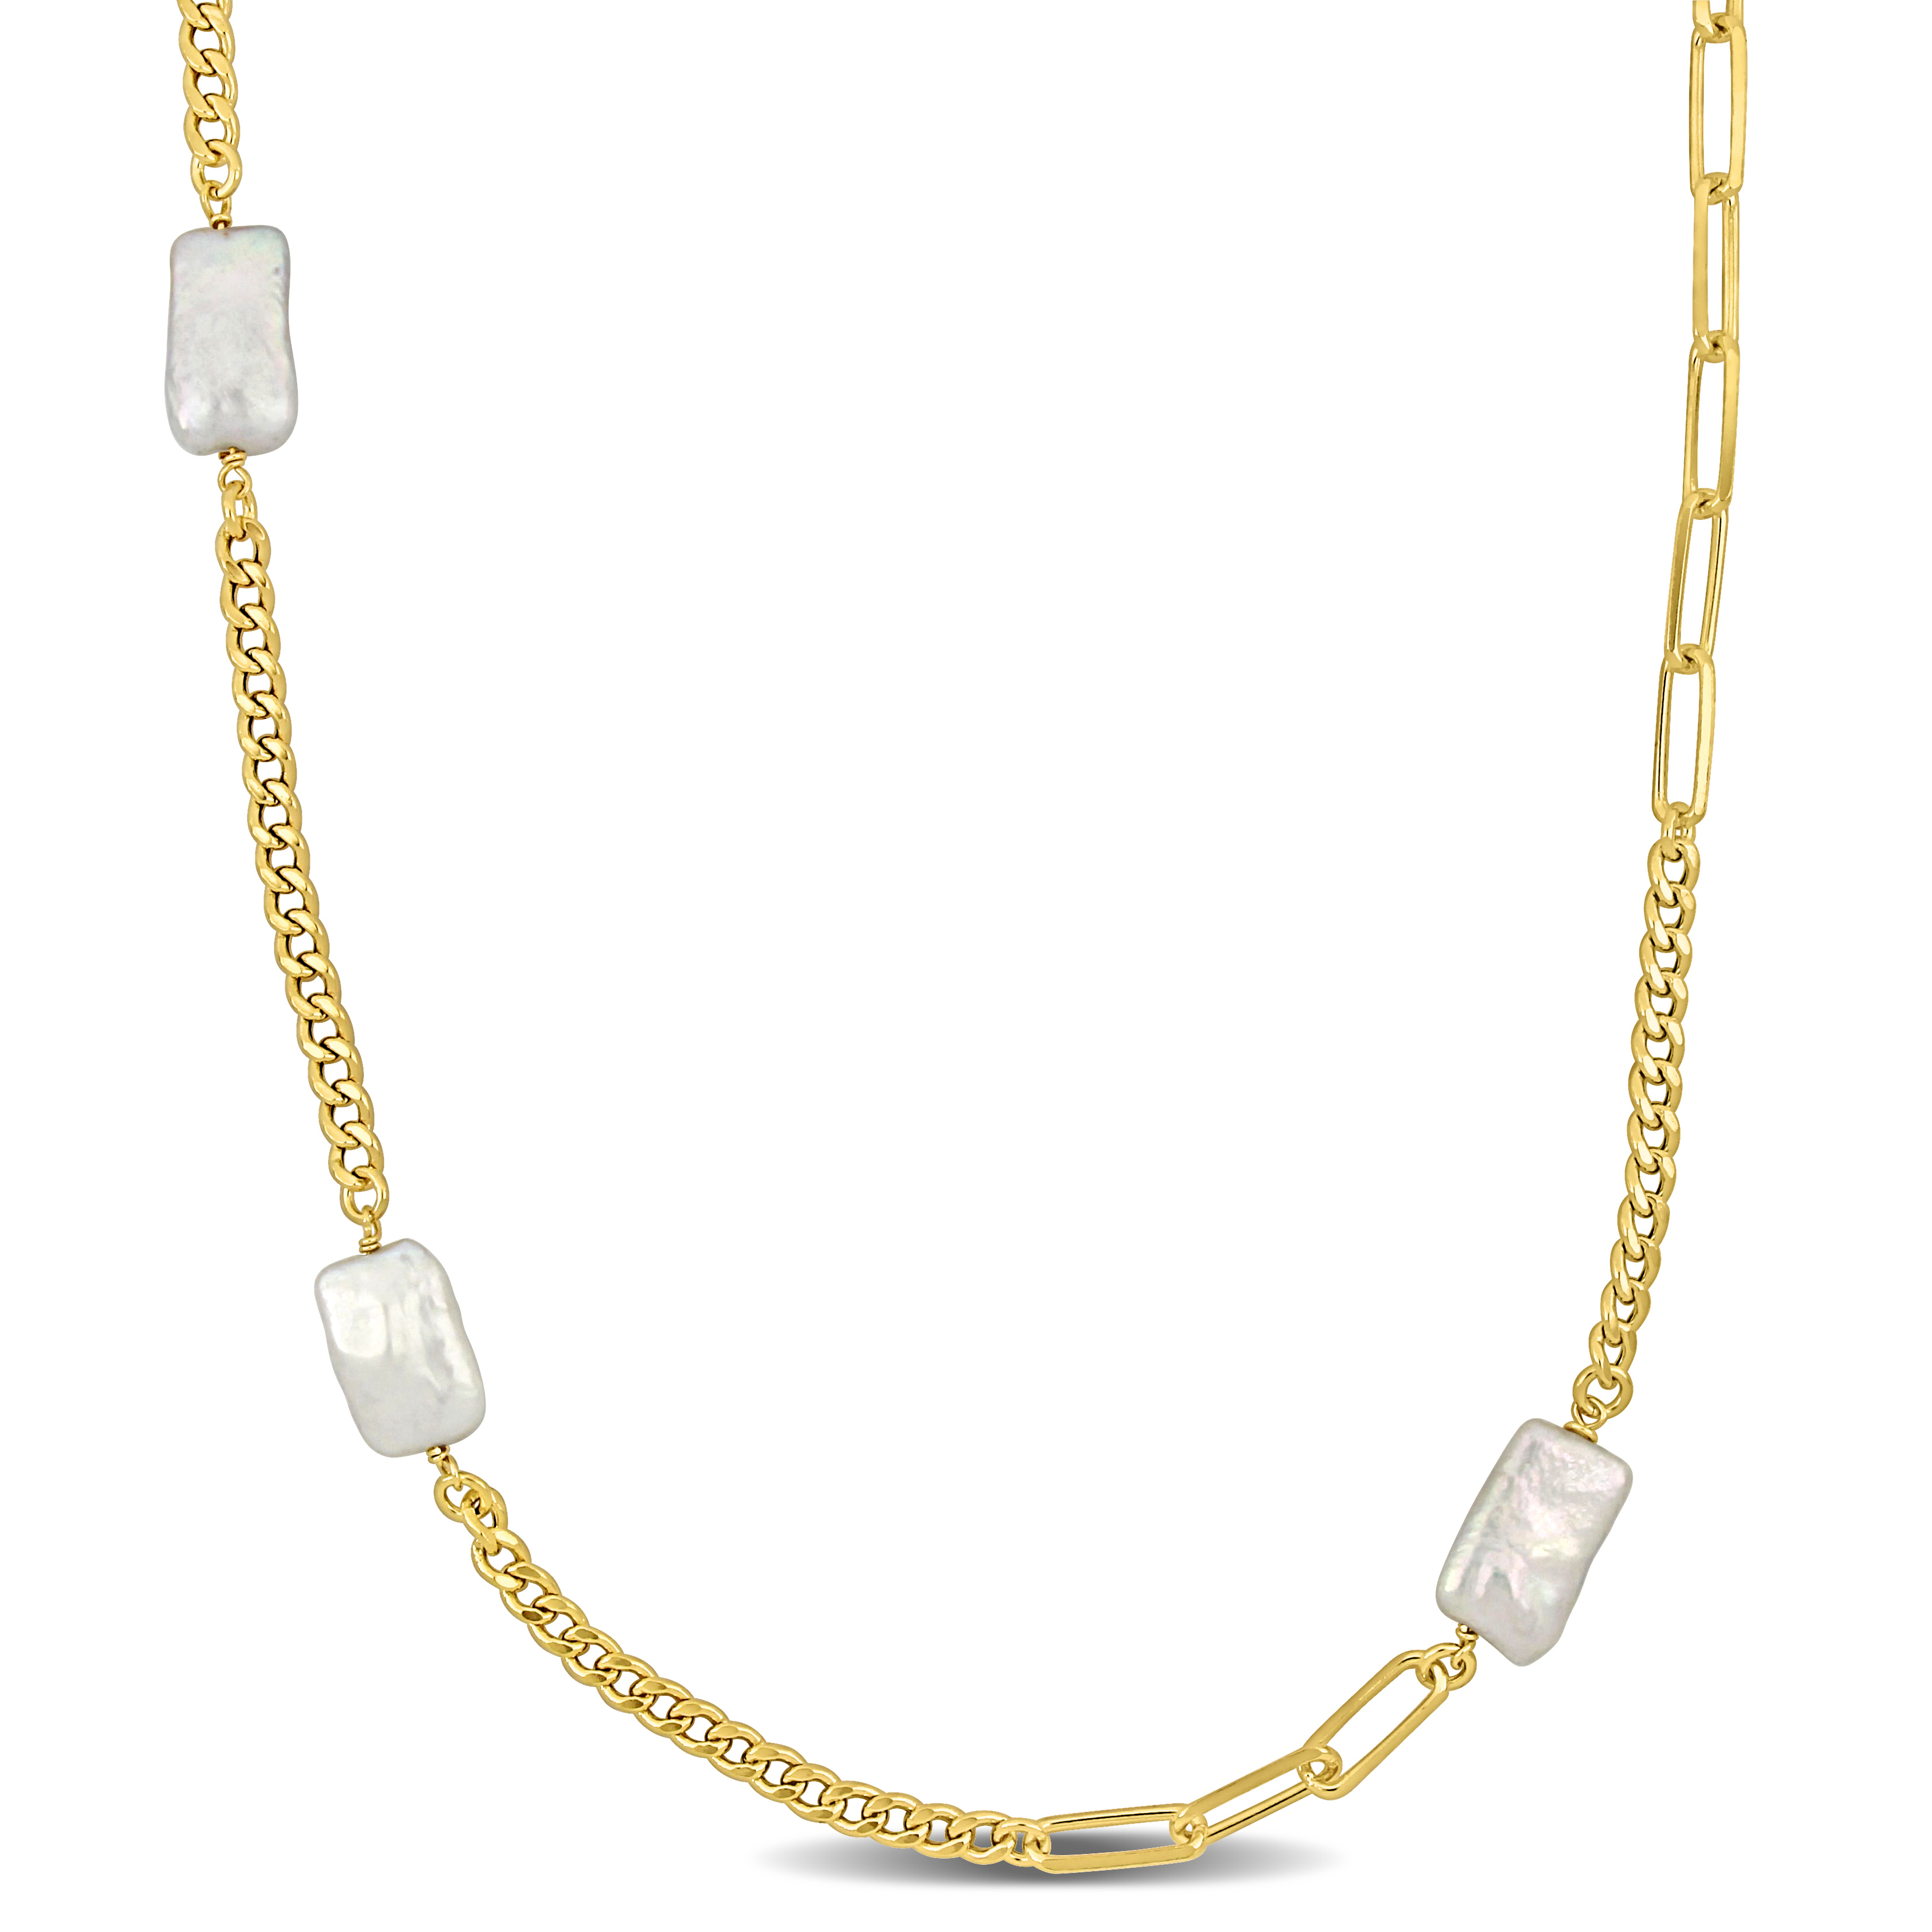 10x16.5 MM Cultured Freshwater Pearl Station Necklace with a Curb and Paperclip Link Chain in Yellow Plated Sterling Silver - 33 in.